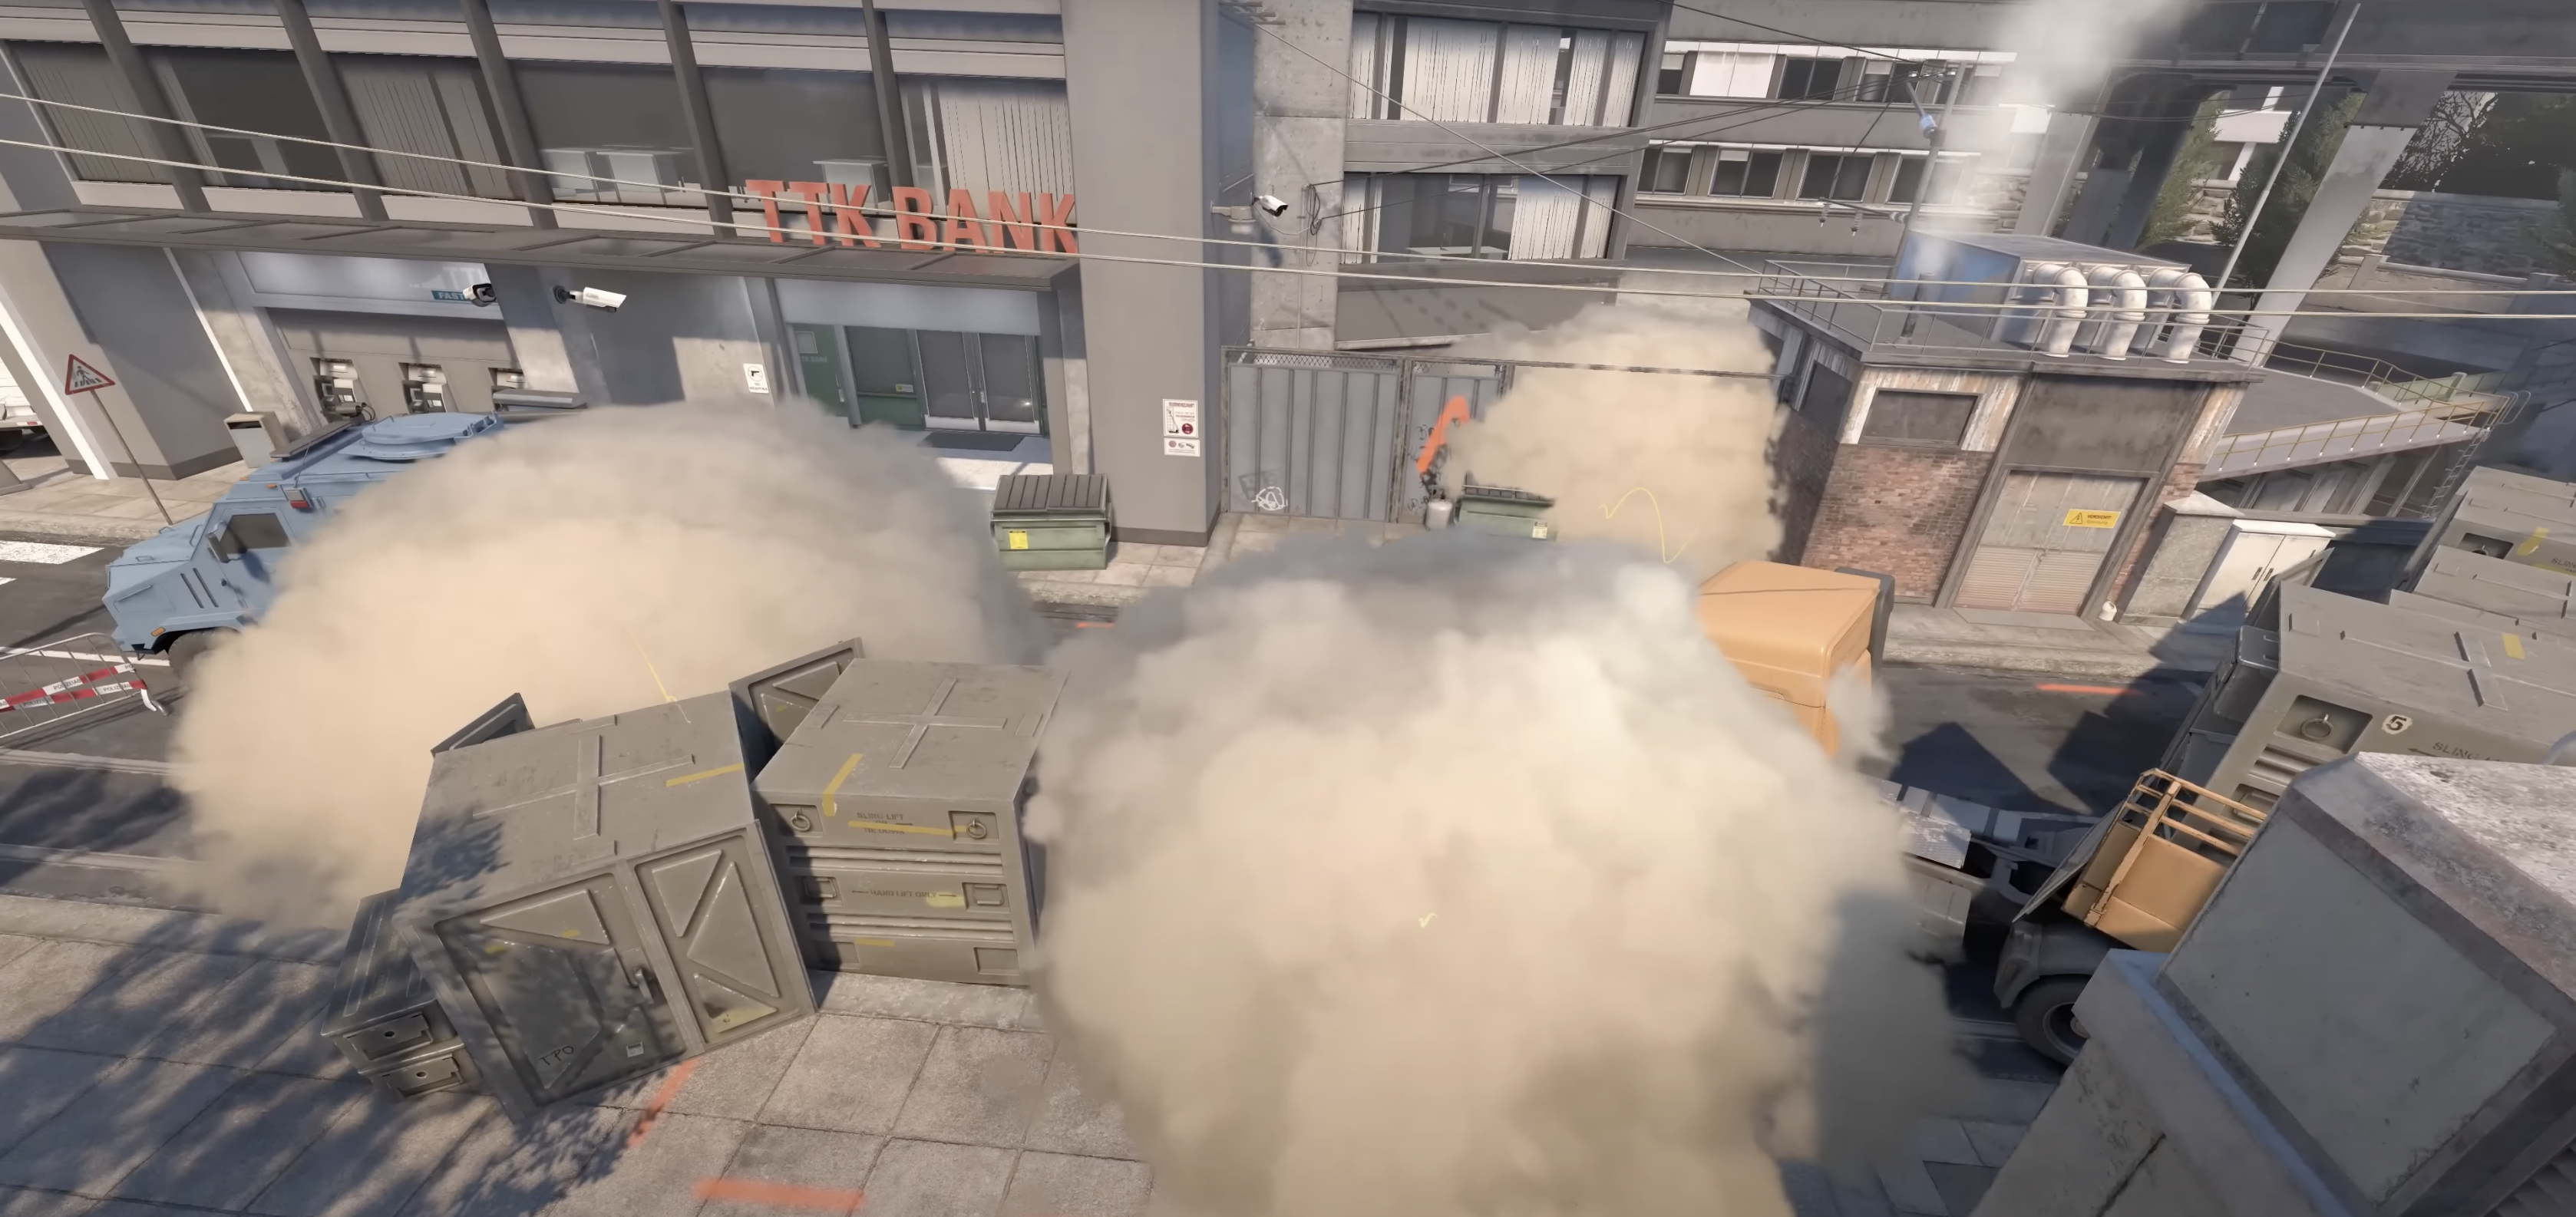 Valve Drops 'Counter-Strike 2' Surprise, Launches Summer 2023 As